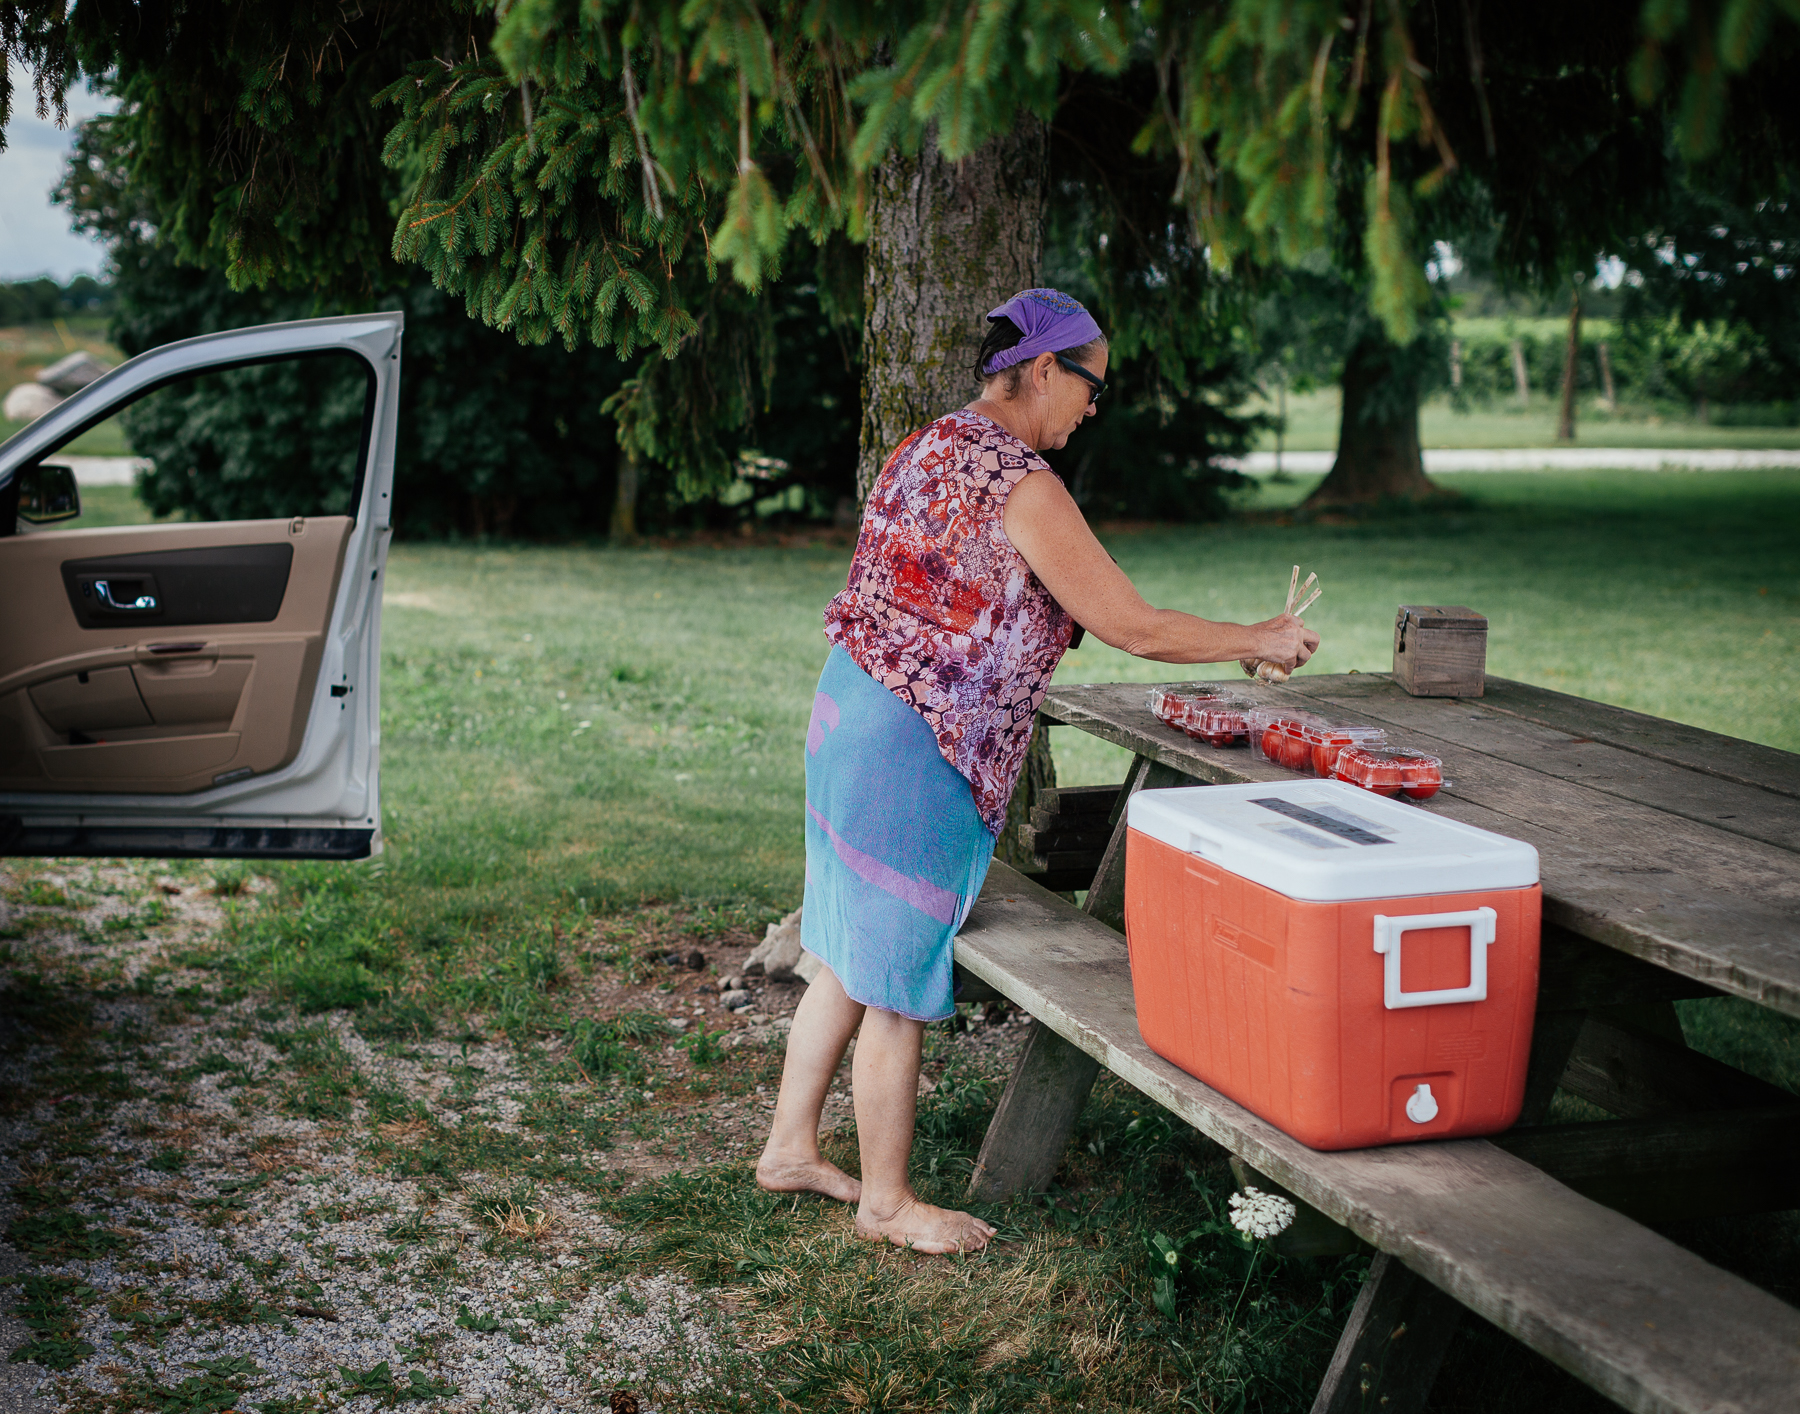 After a swim in the lake, Patricia stops at local farmer Bruno’s produce stand in front of his house.